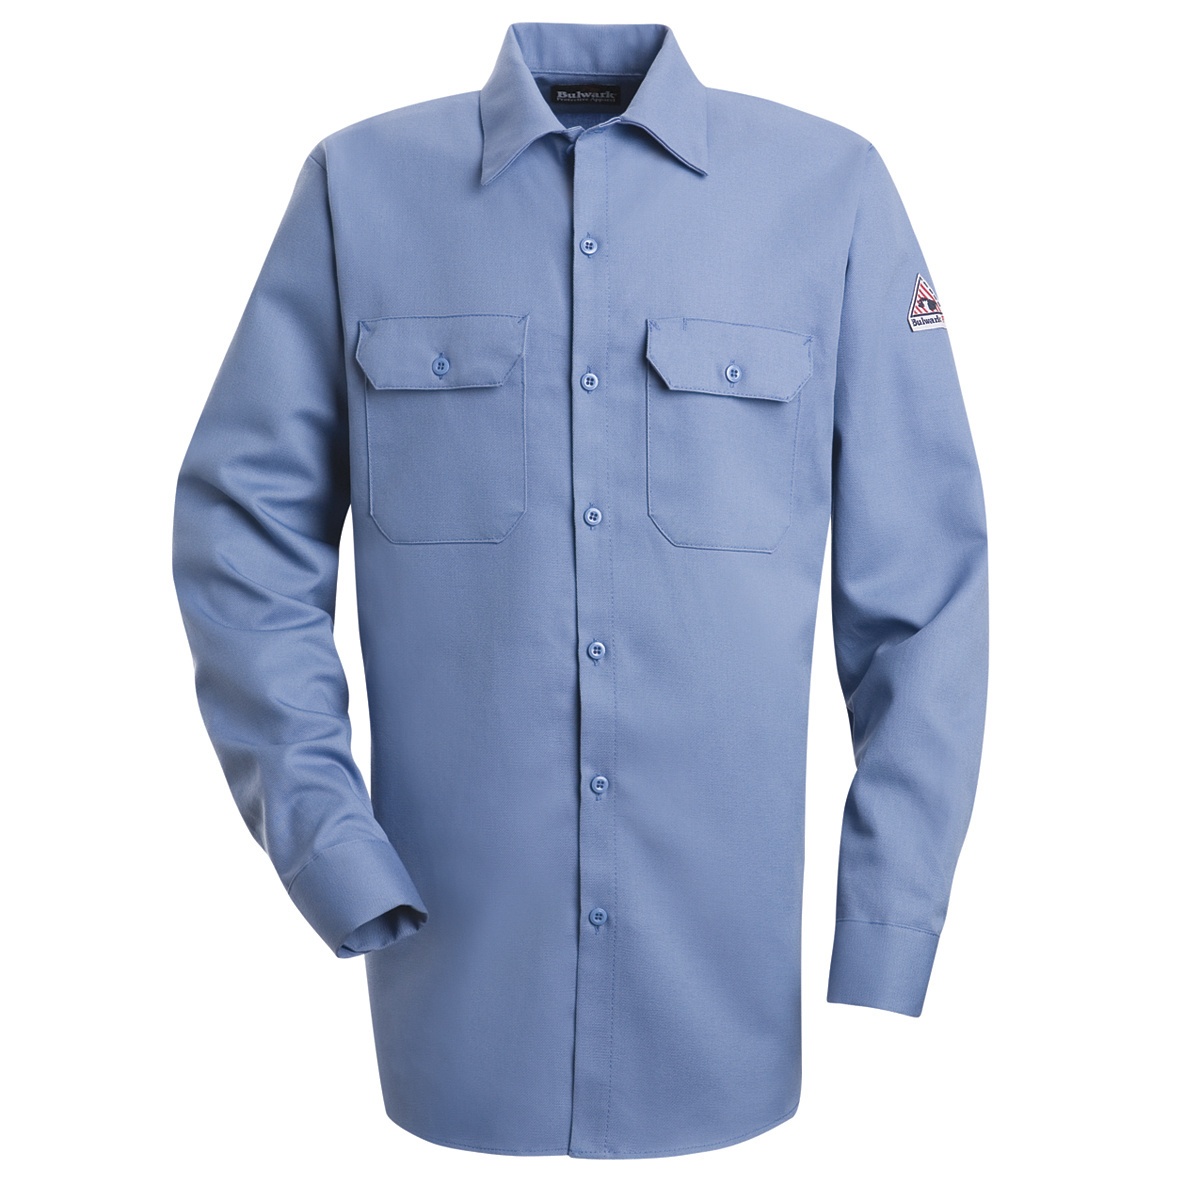 Bulwark® 3X Tall Light Blue Westex Ultrasoft®/Cotton/Nylon Flame Resistant Work Shirt With Button Front Closure